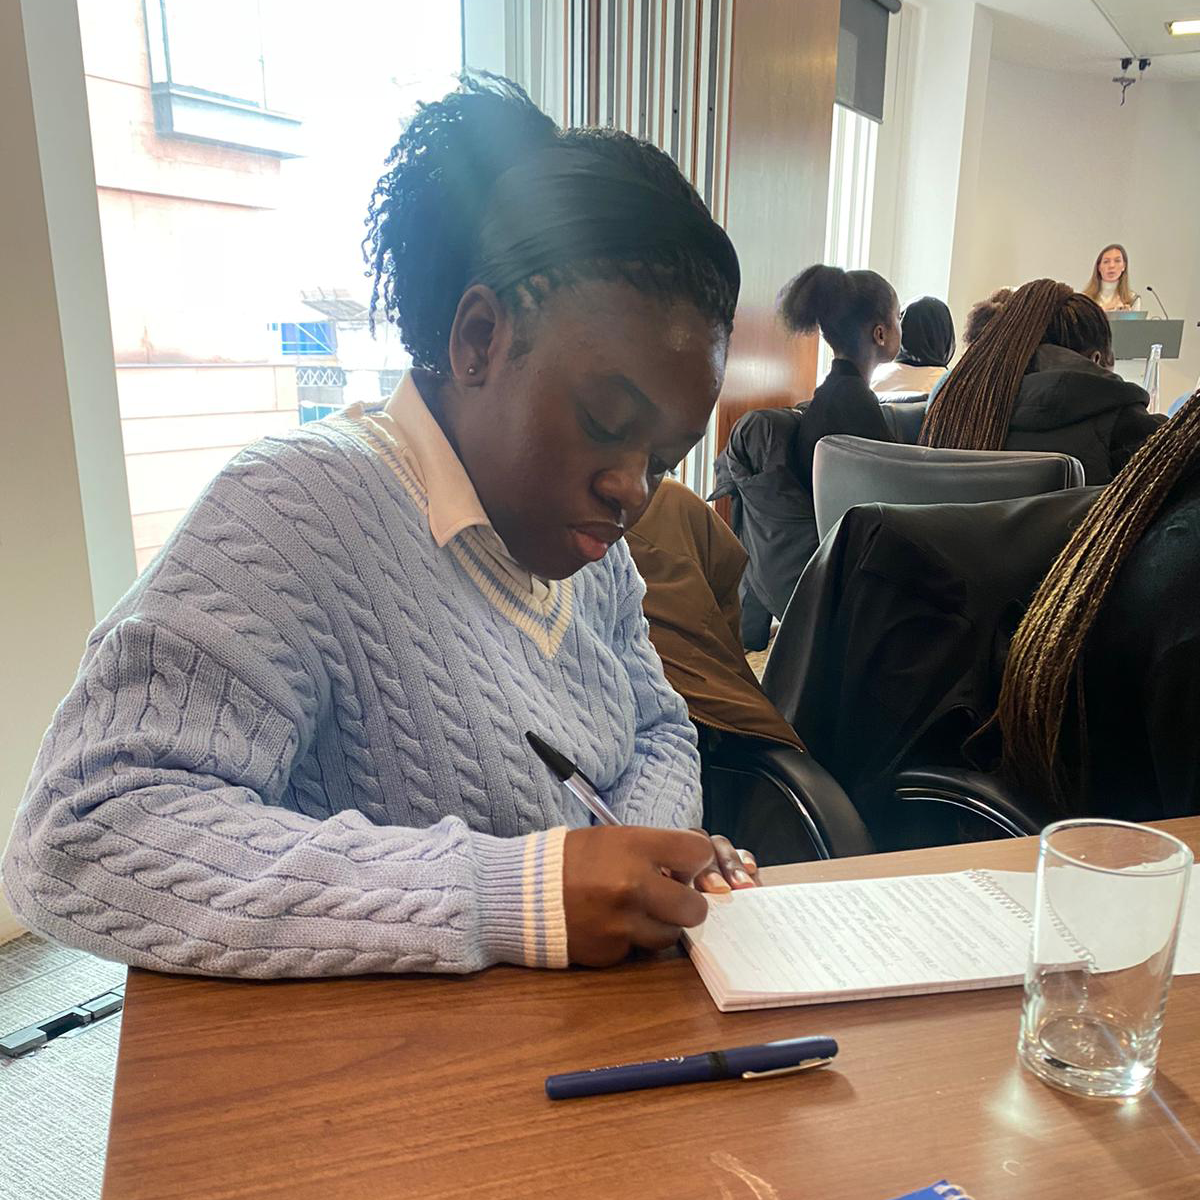 A picture of Jemimah, a young woman seated in a conference room with other participants in the background, writing notes in a notebook. She is wearing a blue cable knit sweater over a white collared shirt and has braided hair. A glass of water and a blue pen are on the table beside her, and in the background, a white woman is giving a presentation.